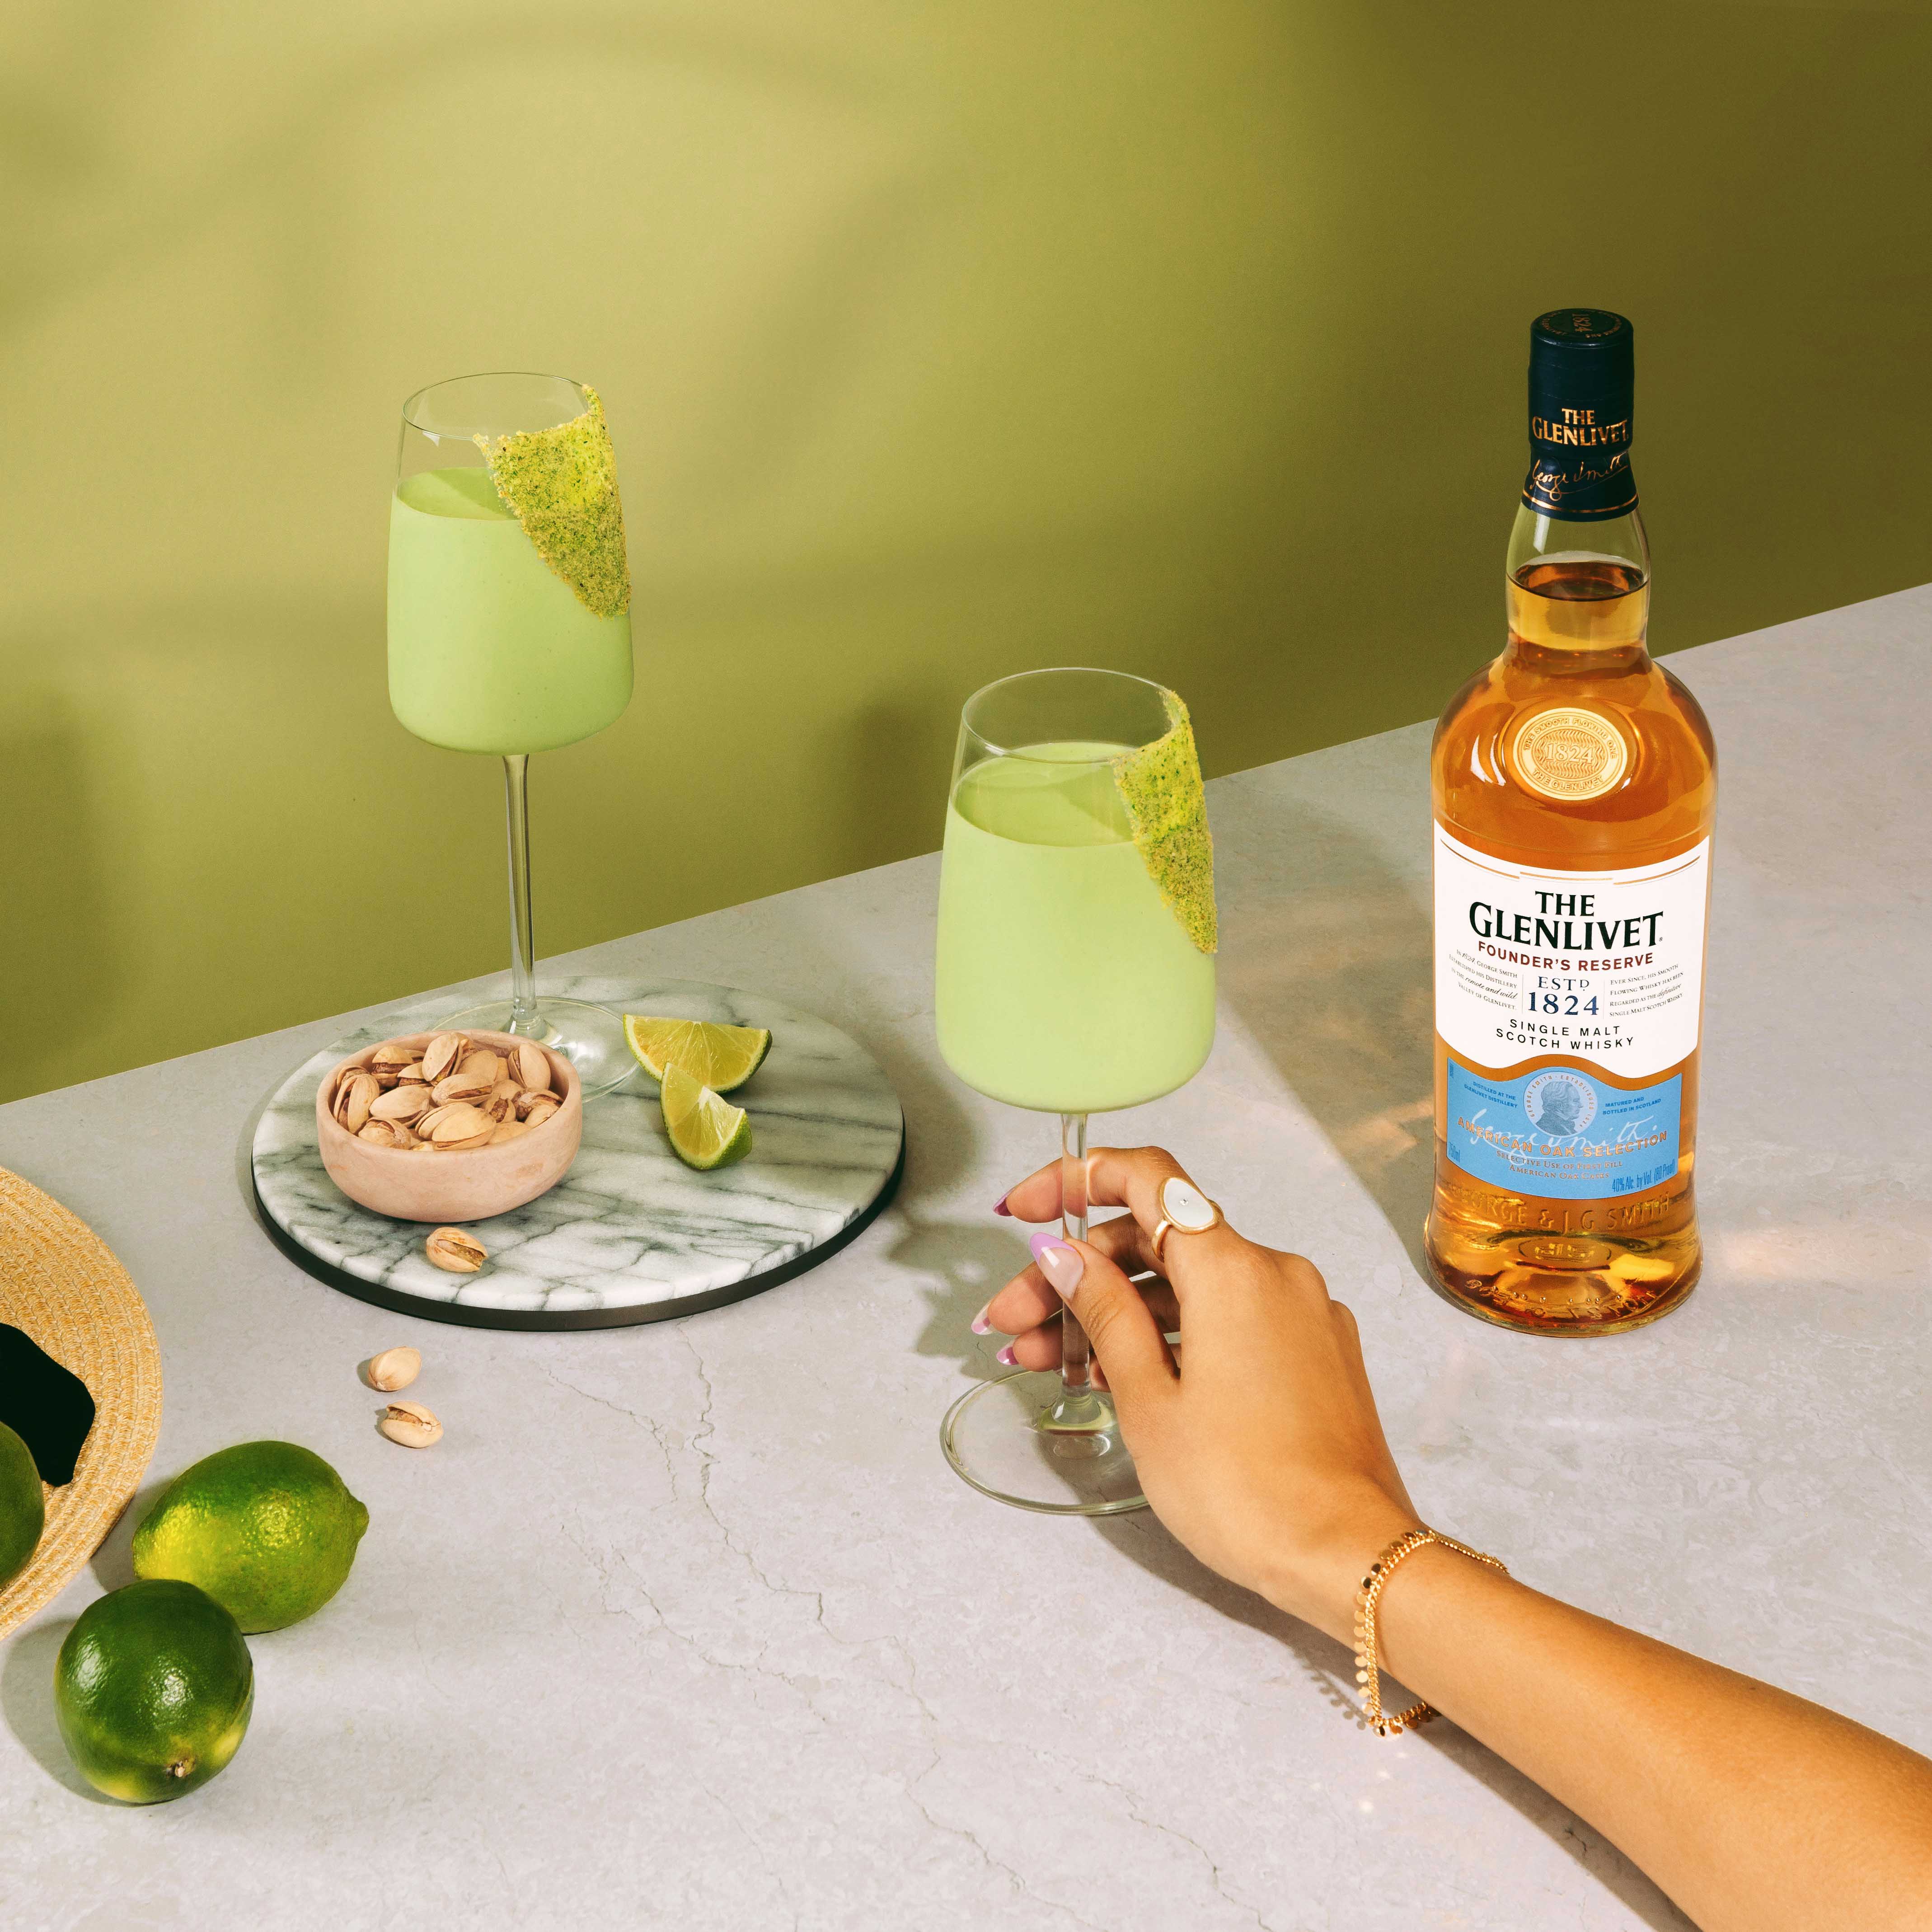 THE GLENLIVET FOUNDERS RESERVE LIFESTYLE PHOTOGRAPHY WITH BOTTLE PISTACHIO 1X1.jpg